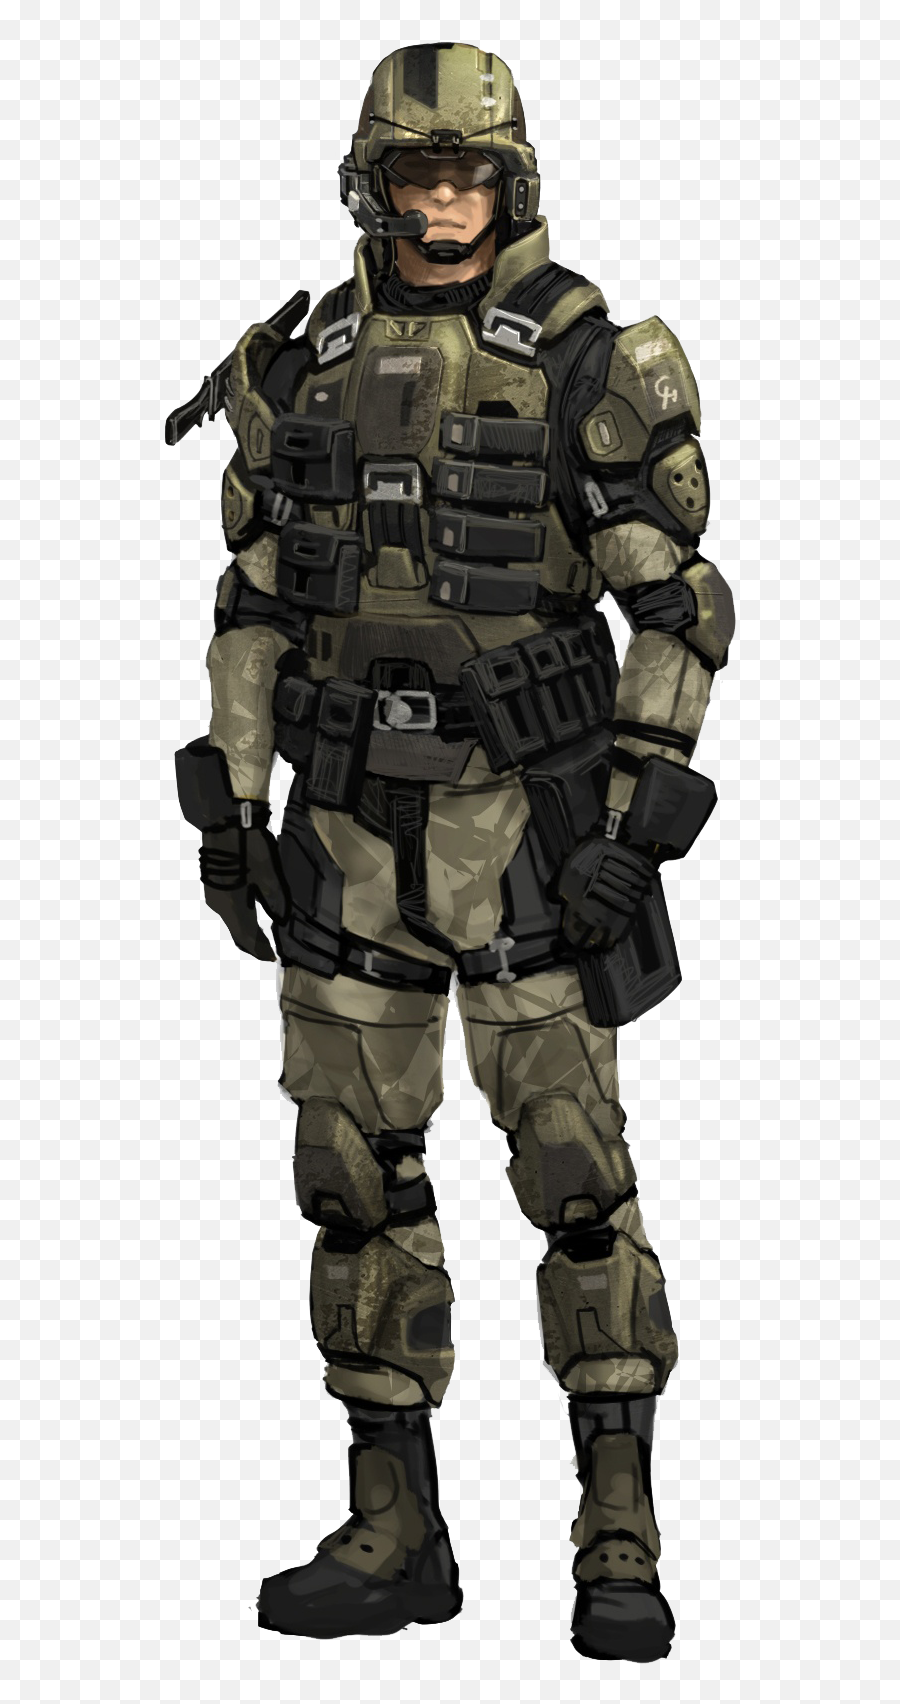 Halo 3 Unsc Marine - Concept Art Bungie Free Download Unsc Marine Halo 3 Png,Unsc Icon